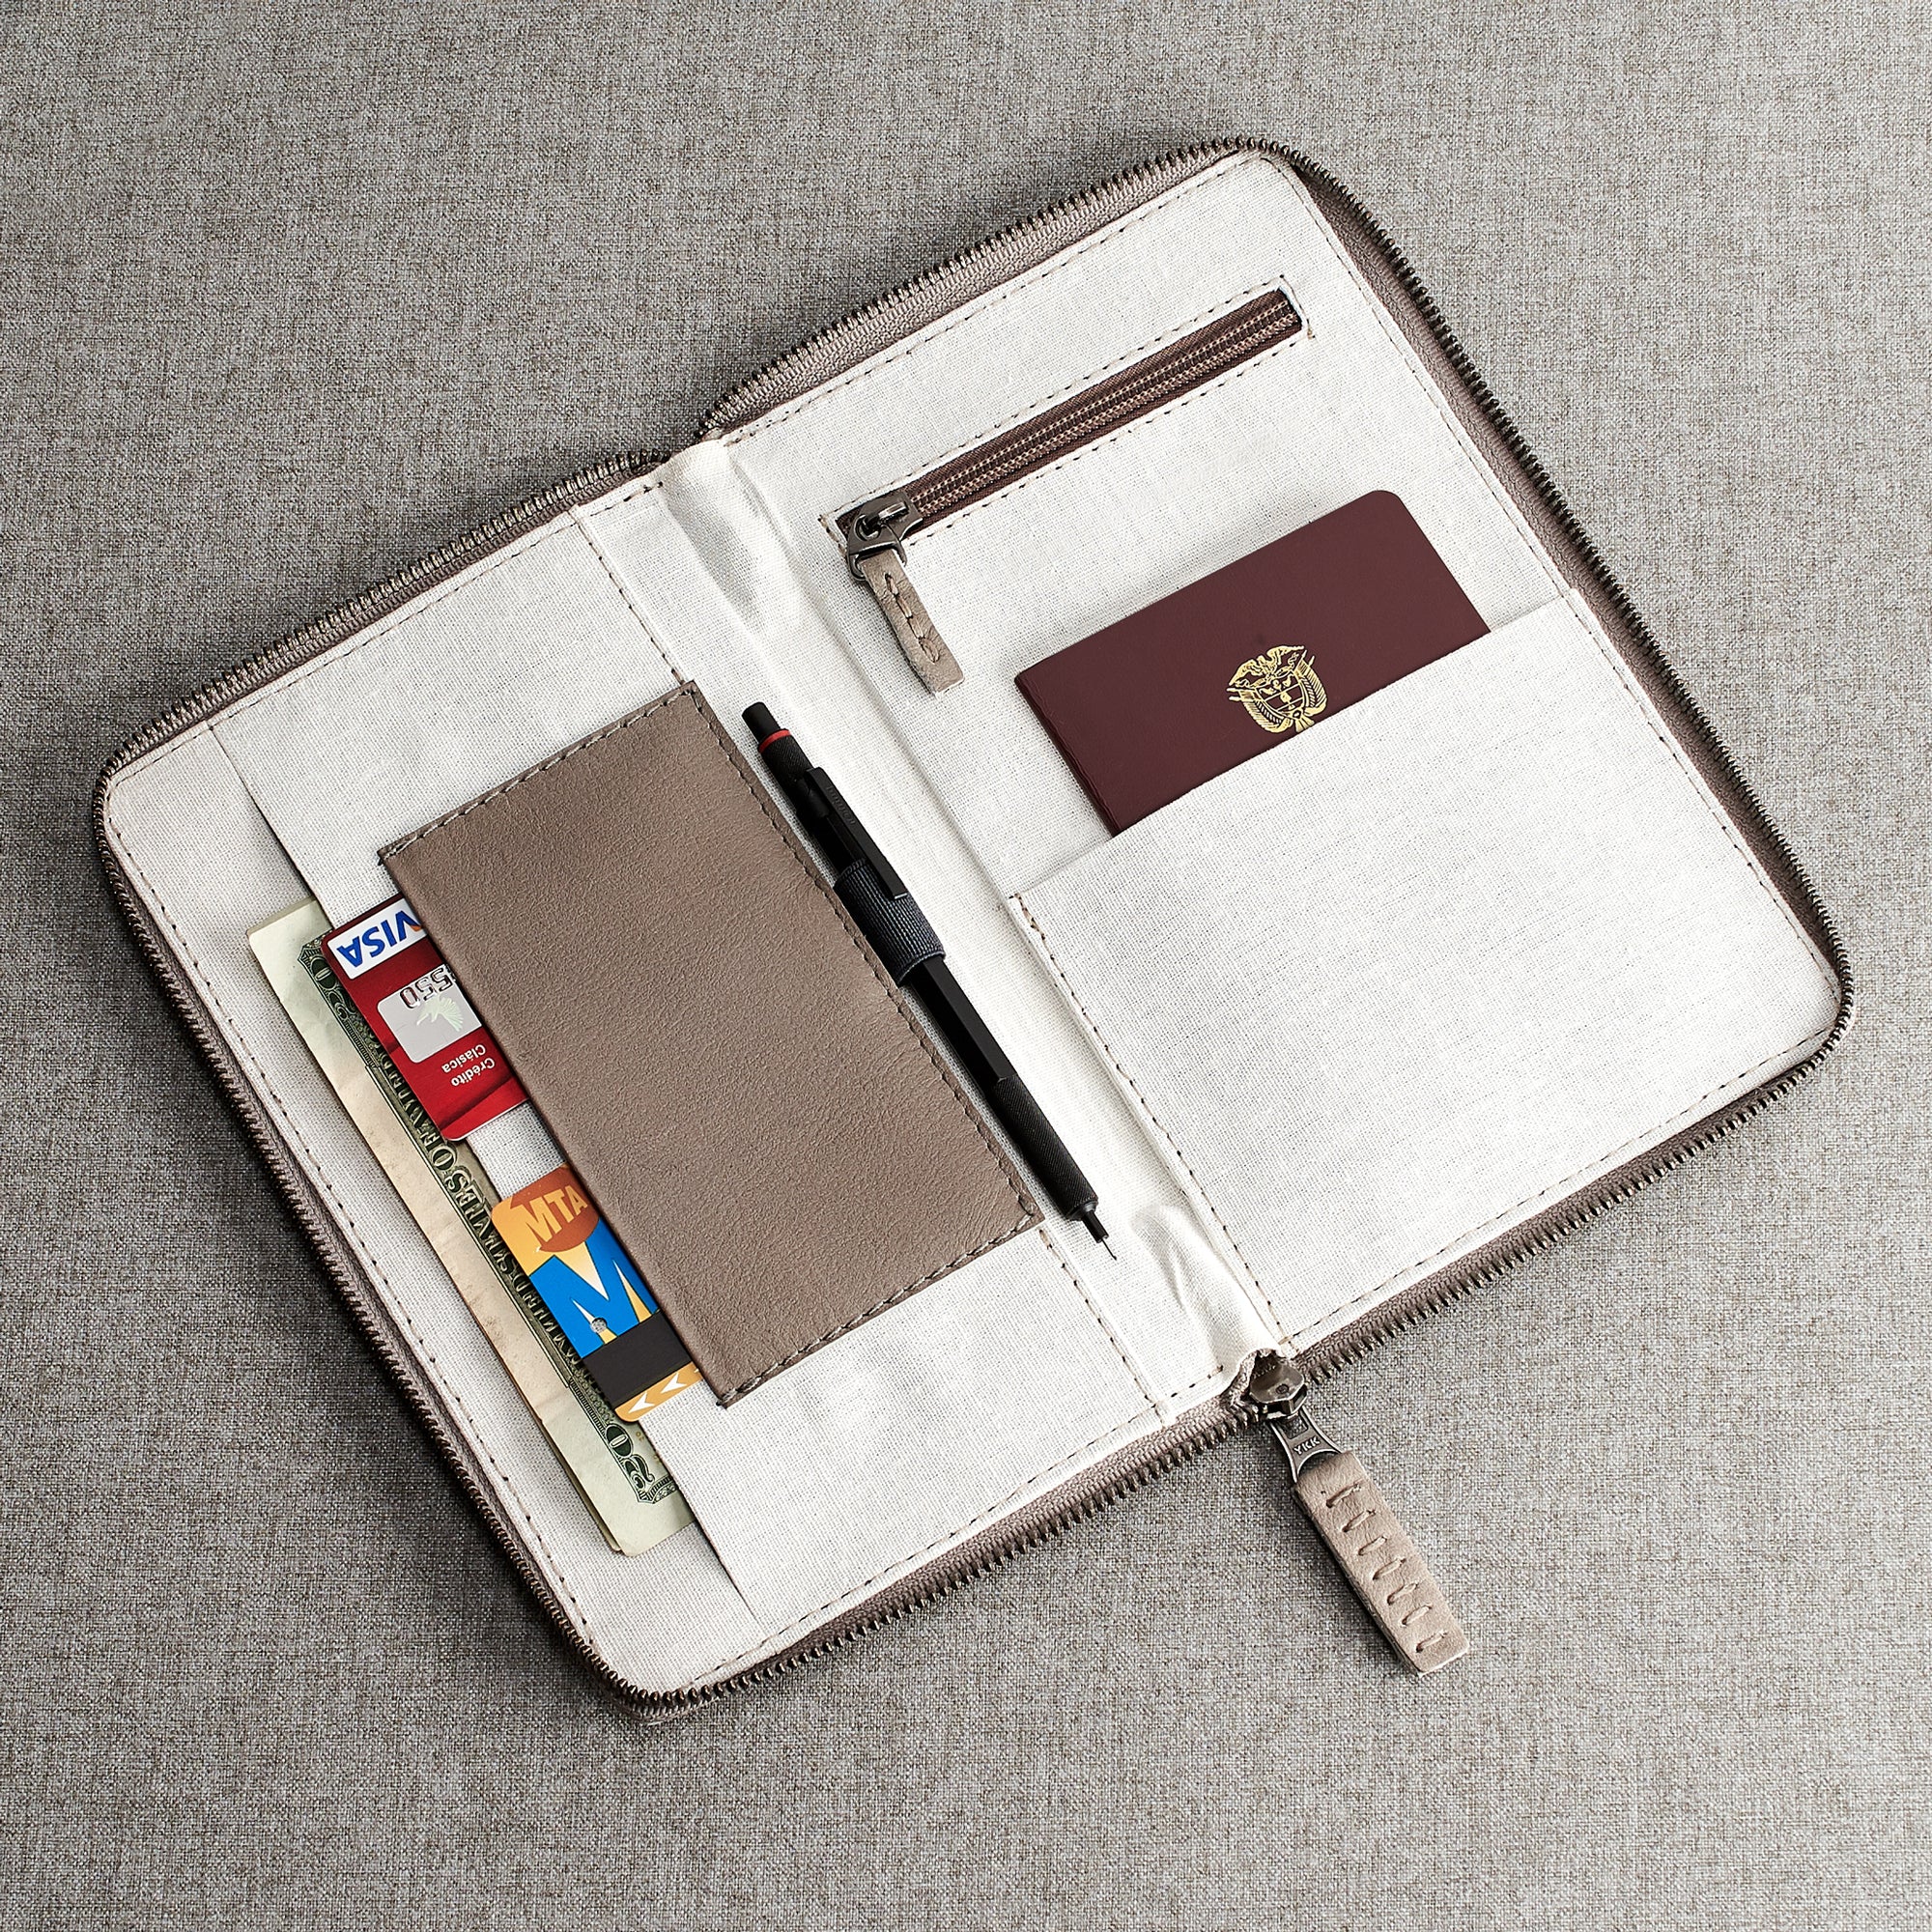 Cards and money pocket. Grey leather passport holder. Perfect for travelers. Gift for men. Personalized engraving. Handmade Leather wallet perfect money and card holder for trips